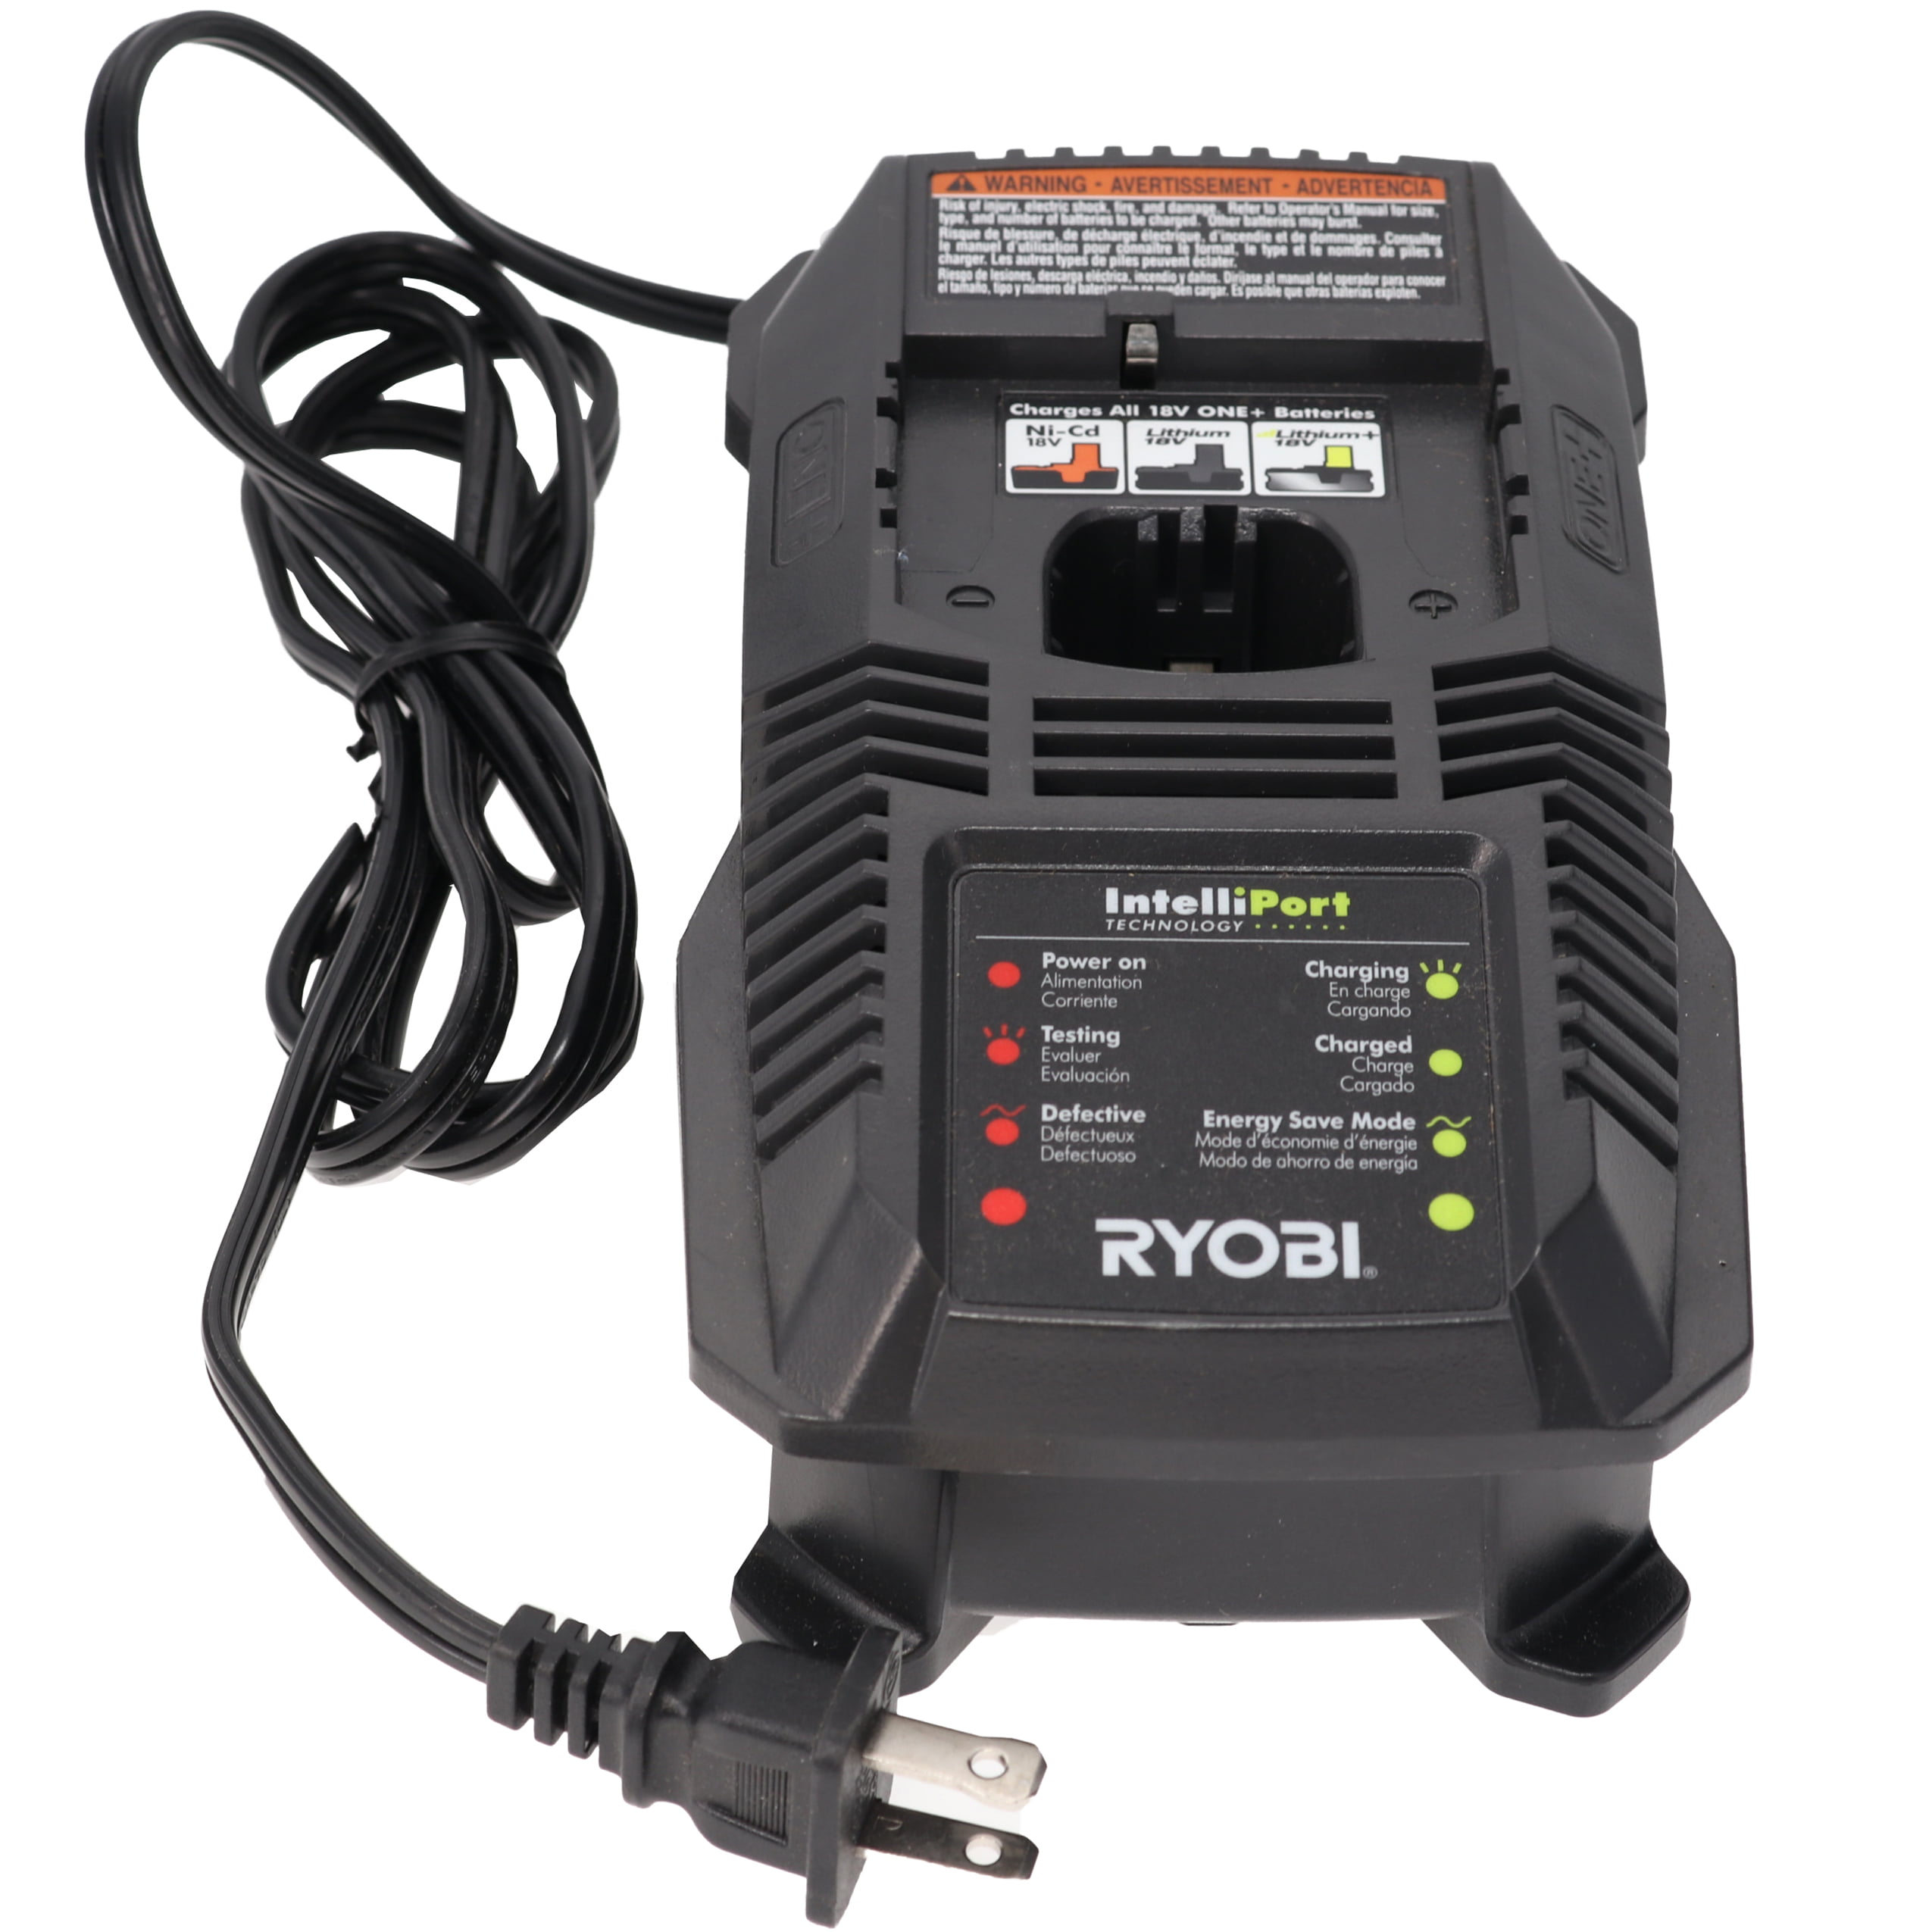 P118 18V NiCd Lithium Ion Battery Charger for sale online Ryobi ONE 